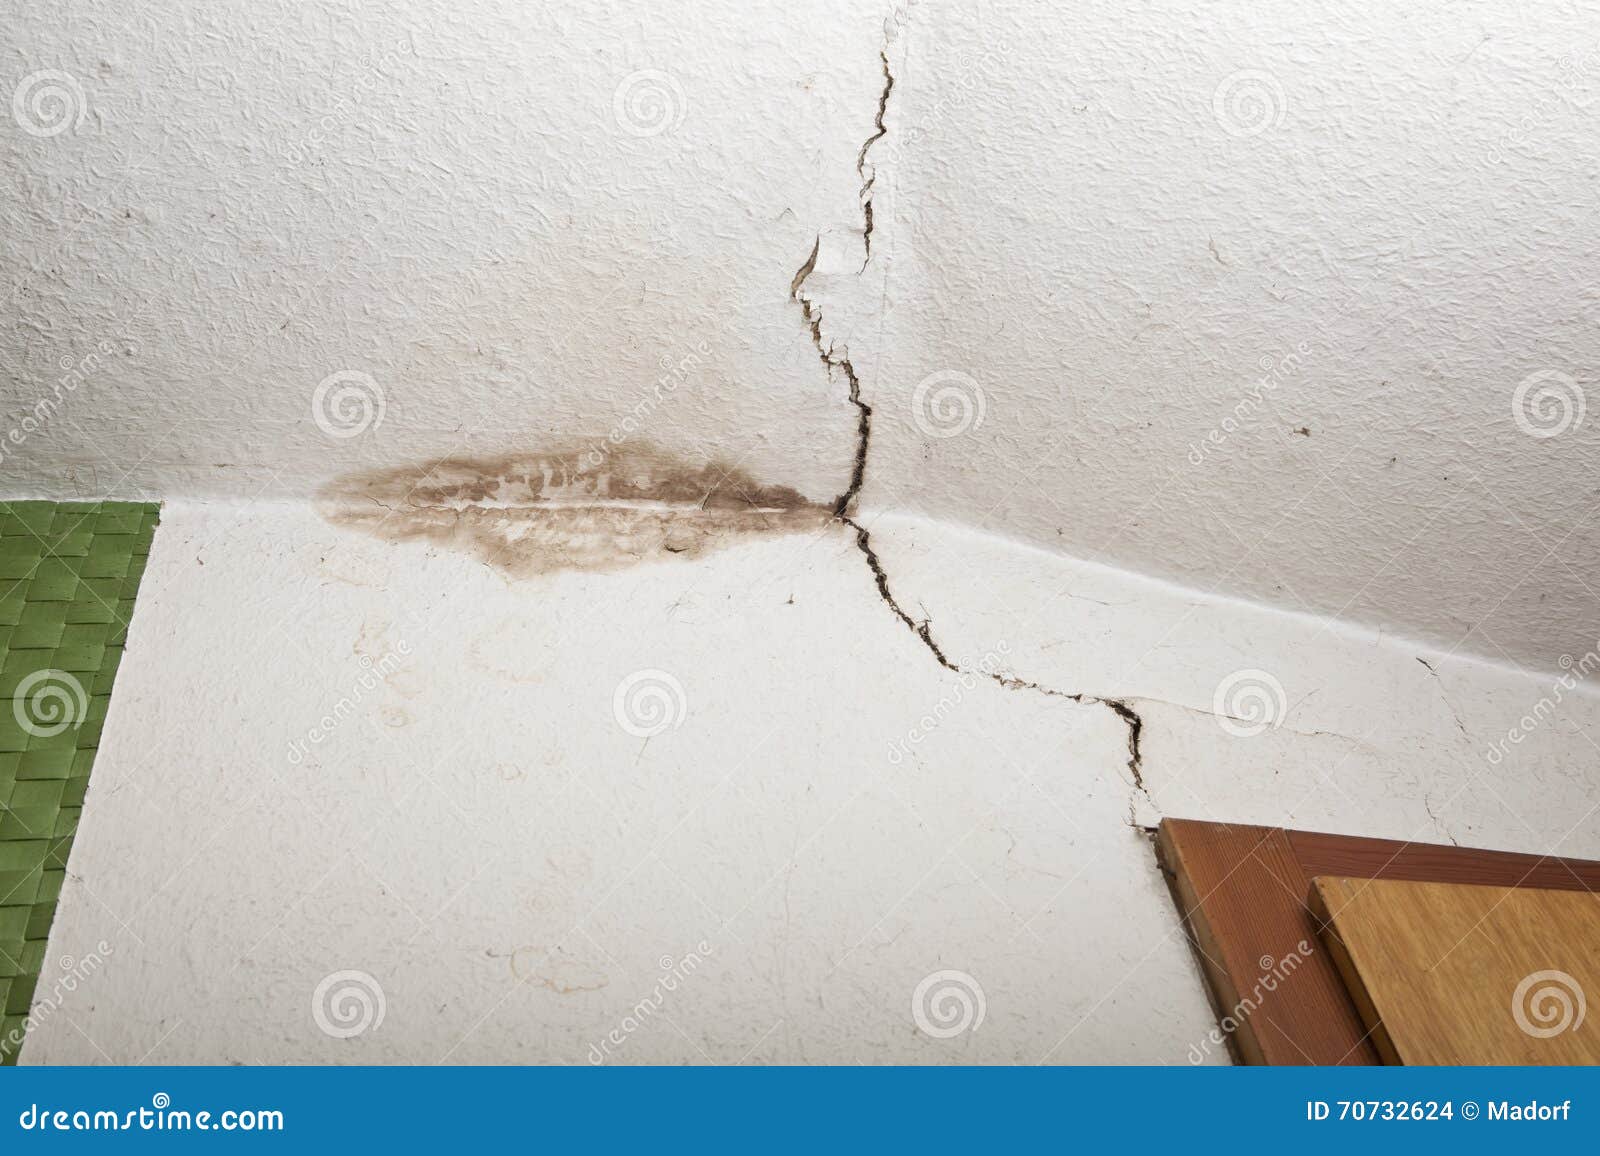 structural damage on ceiling, mold in corner, crack in ceiling